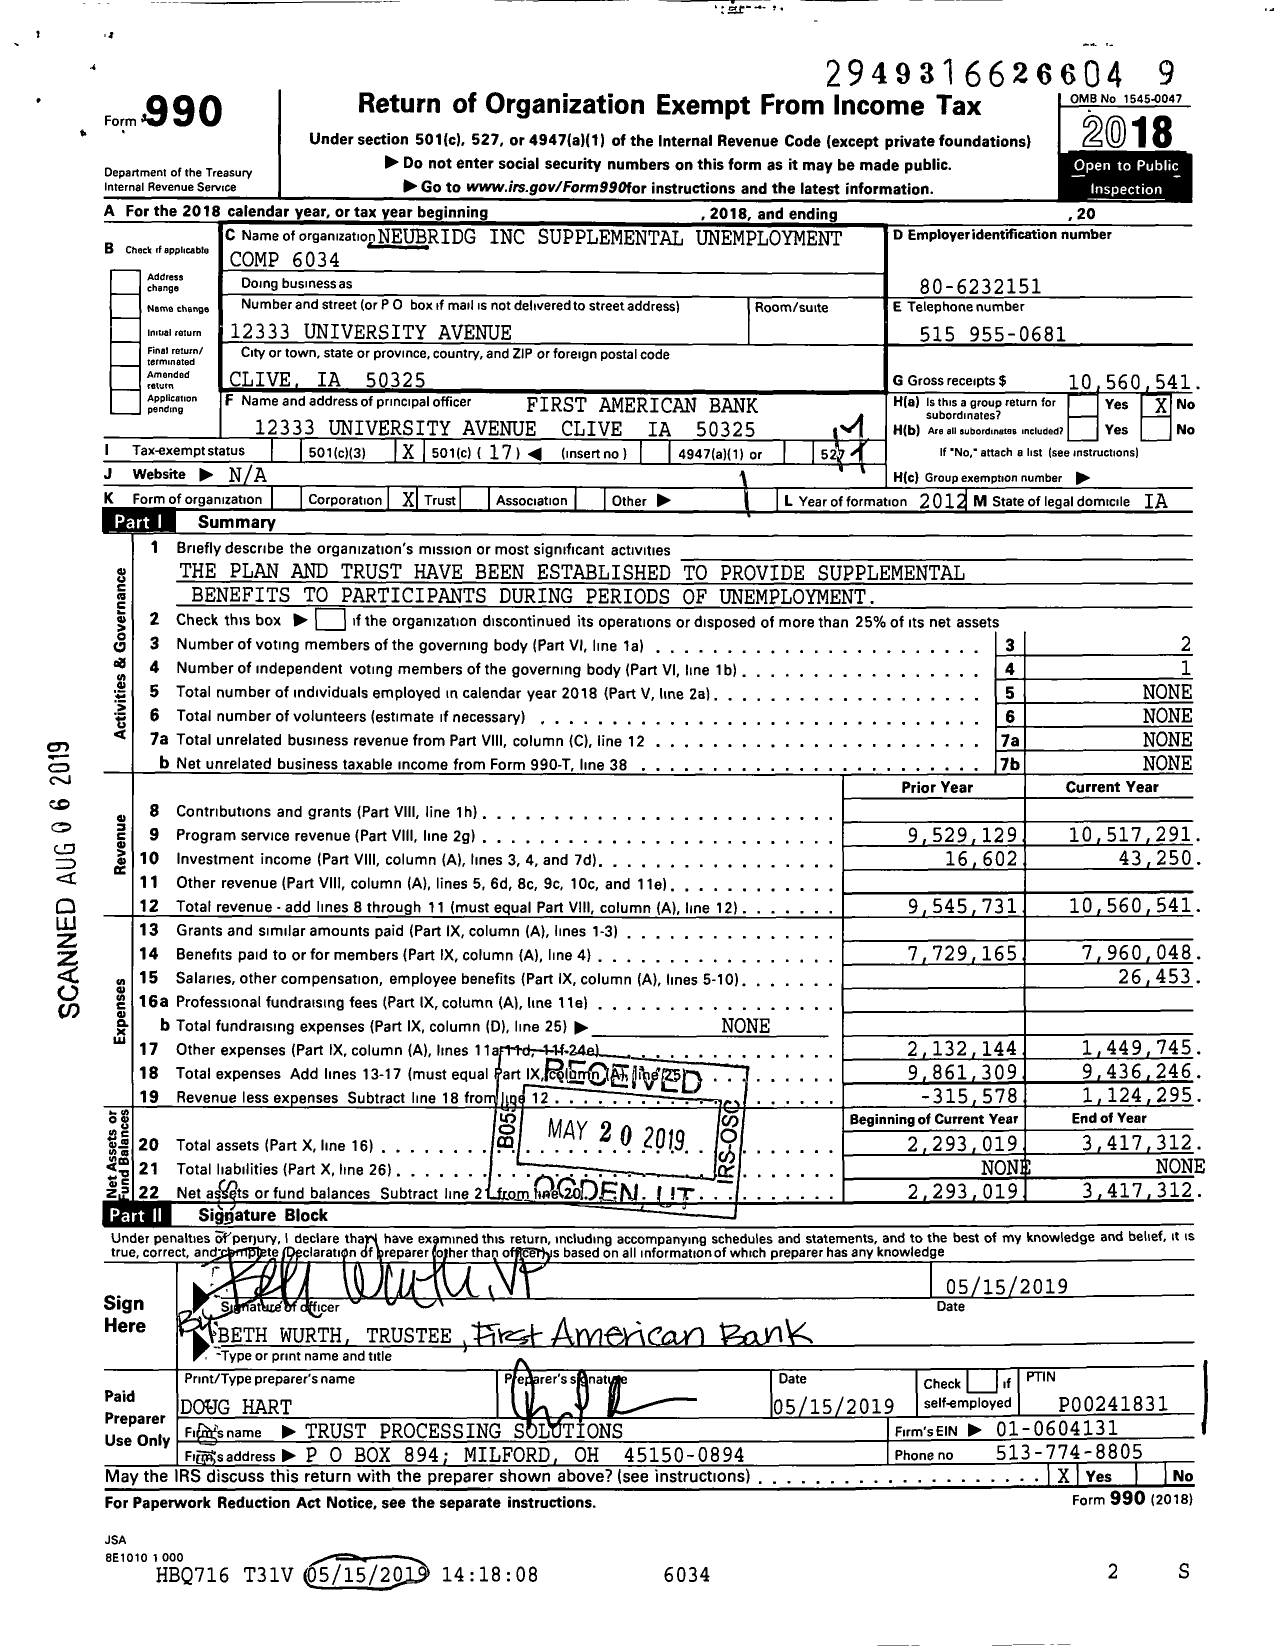 Image of first page of 2018 Form 990O for Neubridg Supplemental Unemployment Compensation Benefit Plan and Trust